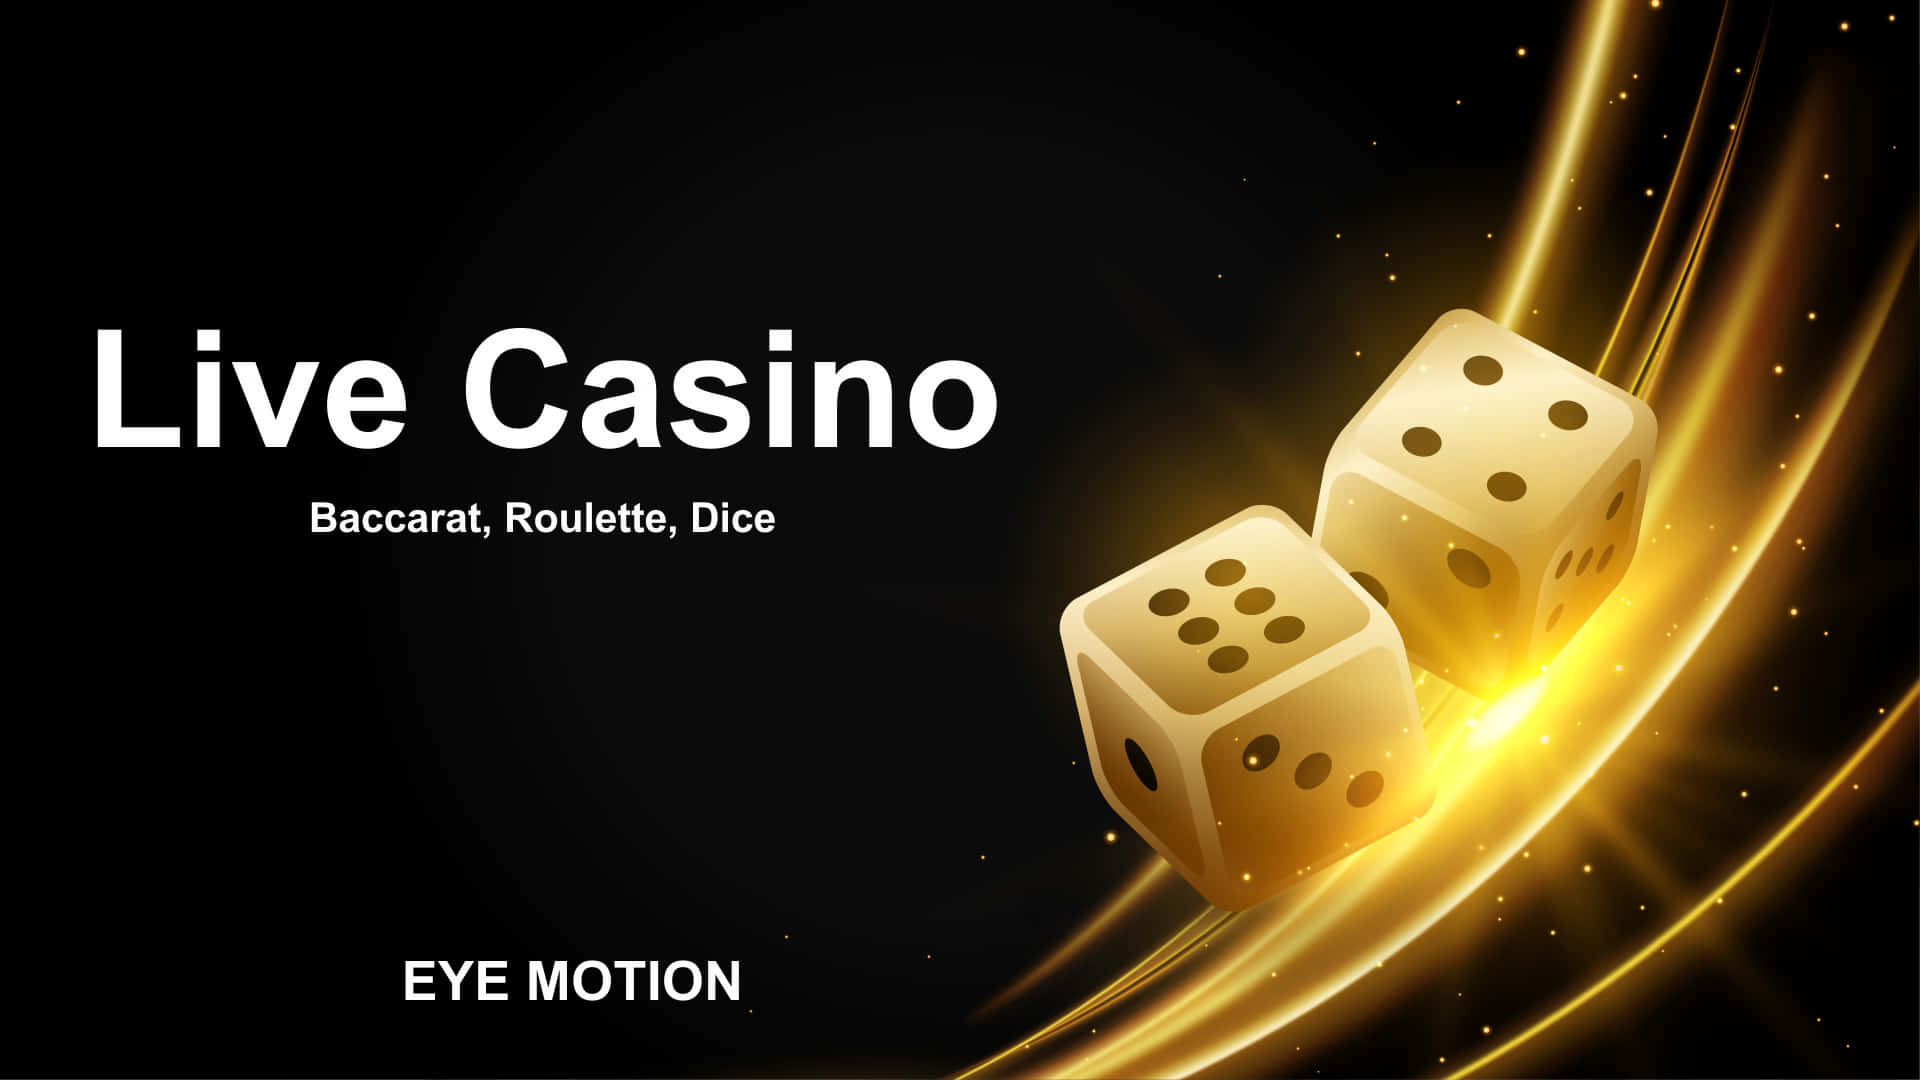 Black And Gold Casino Background